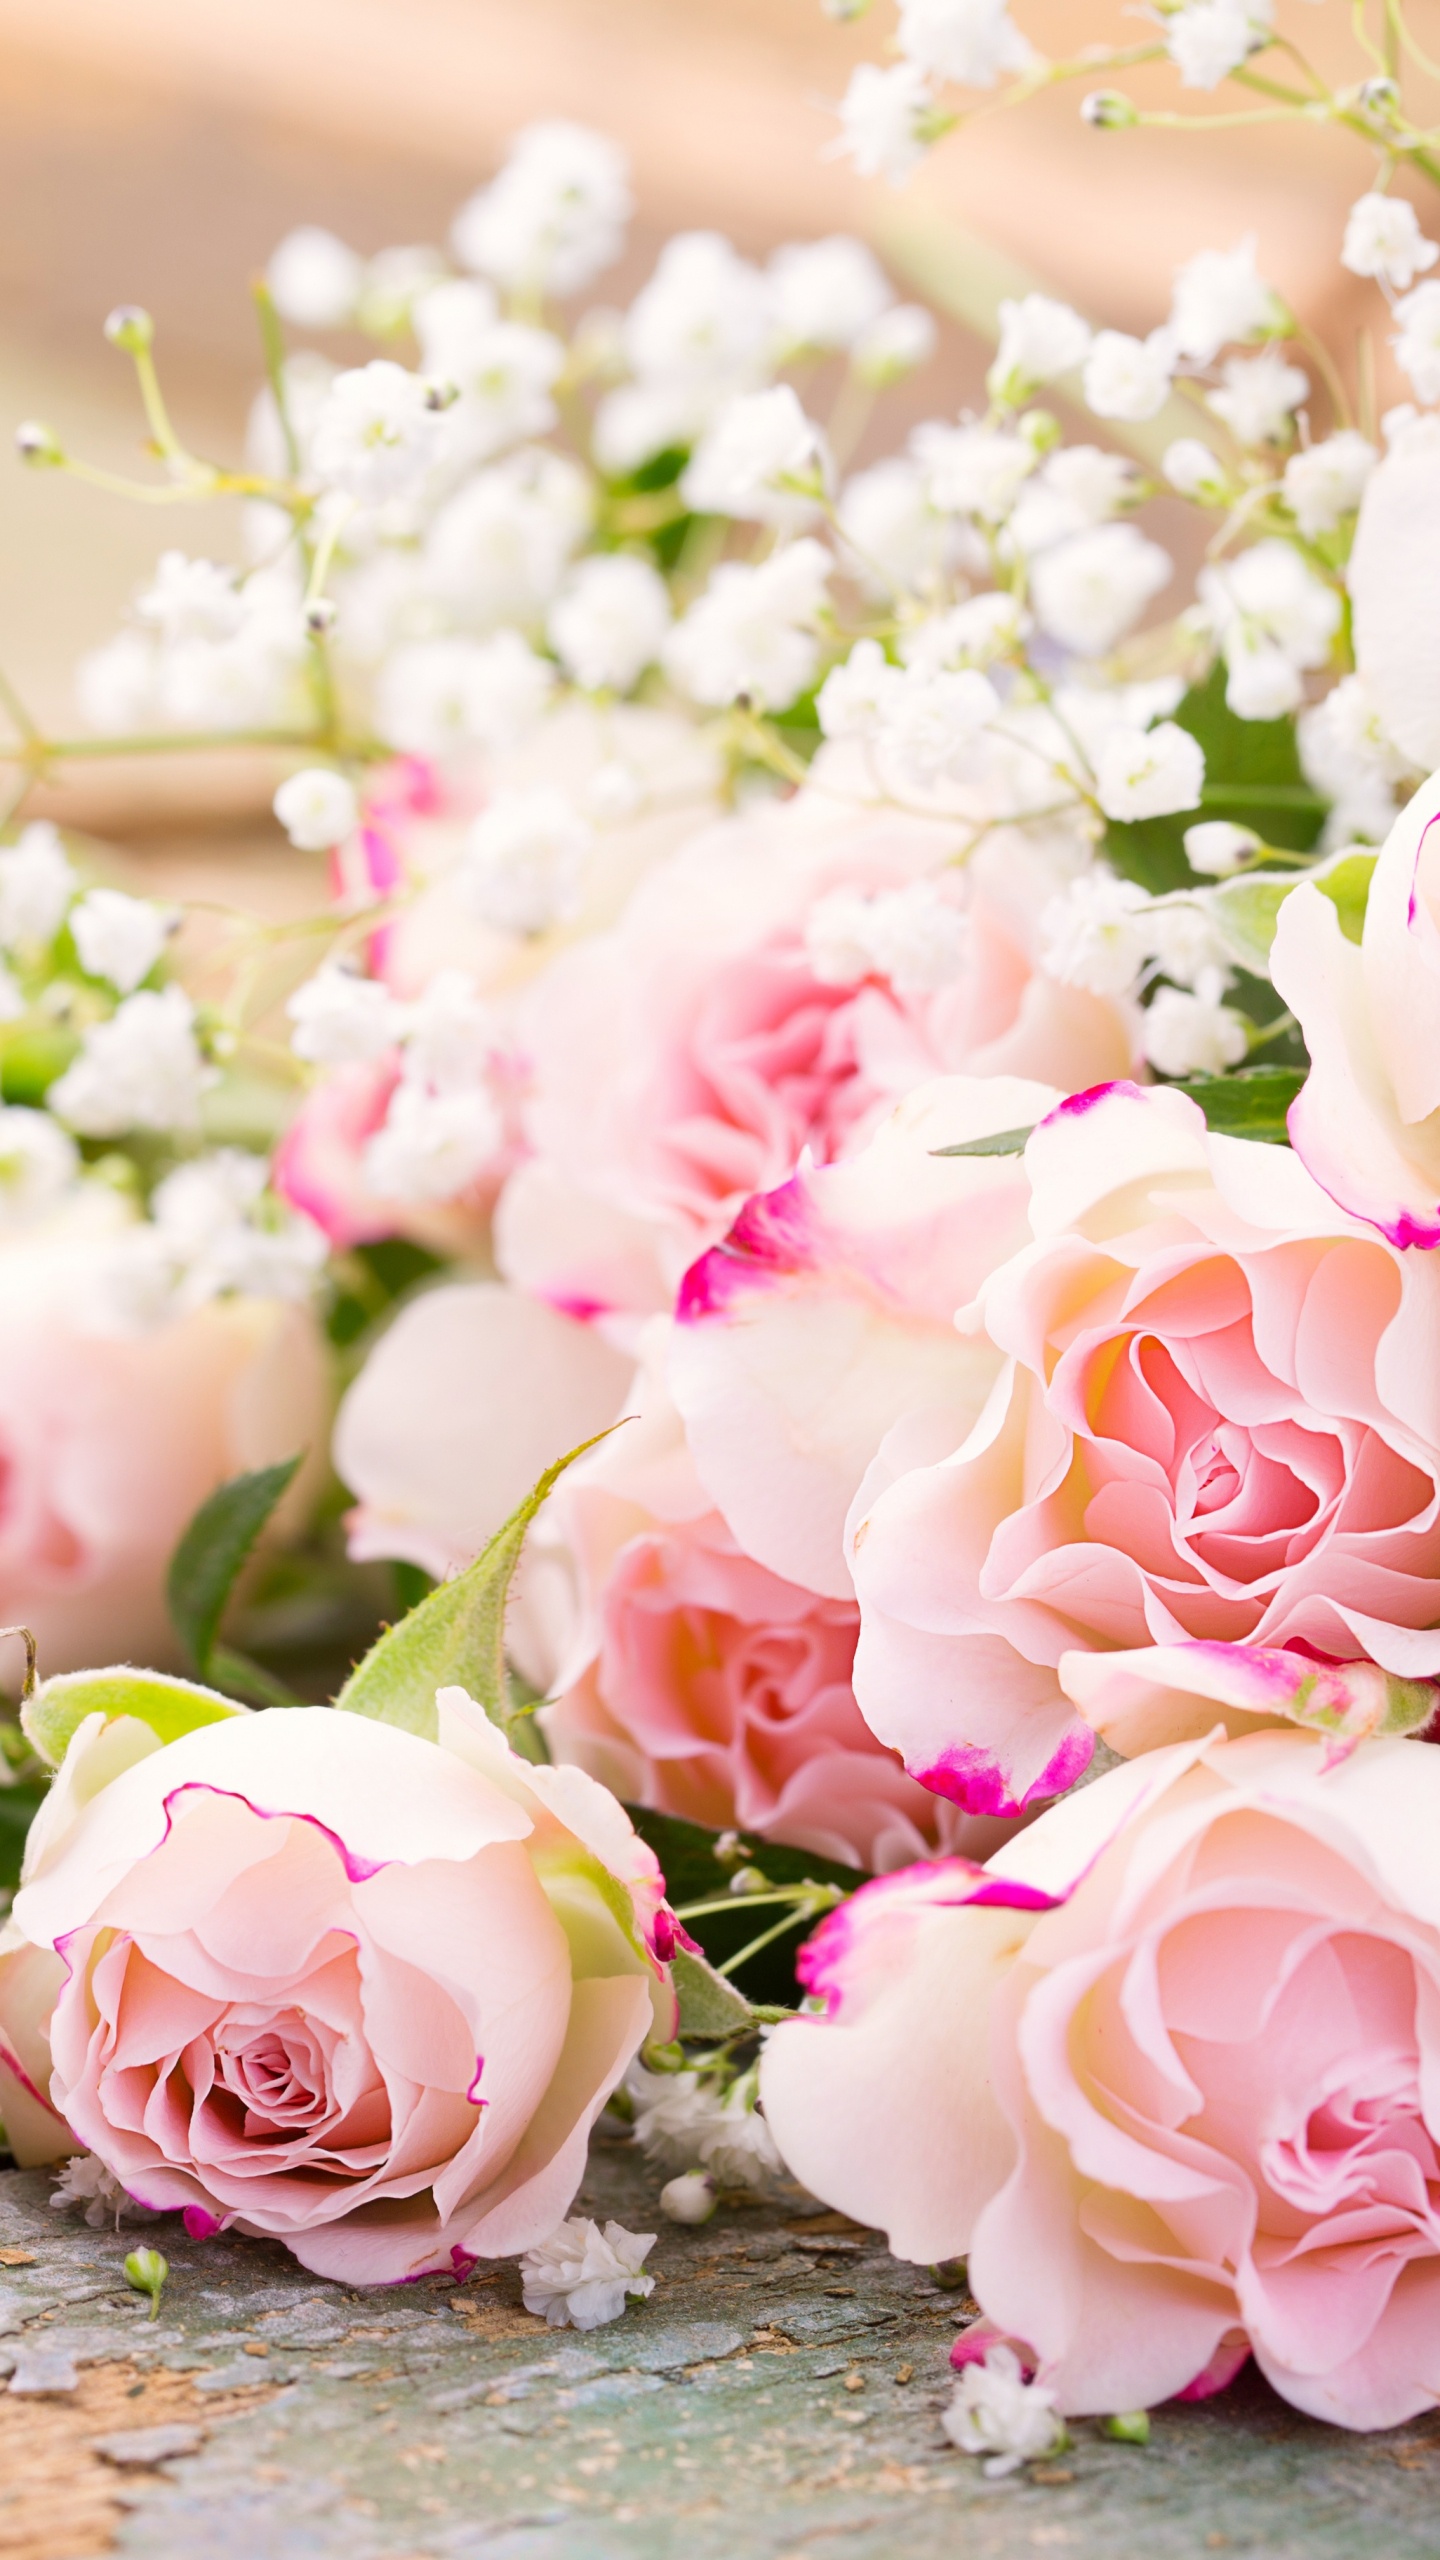 Pink and White Roses Bouquet. Wallpaper in 1440x2560 Resolution